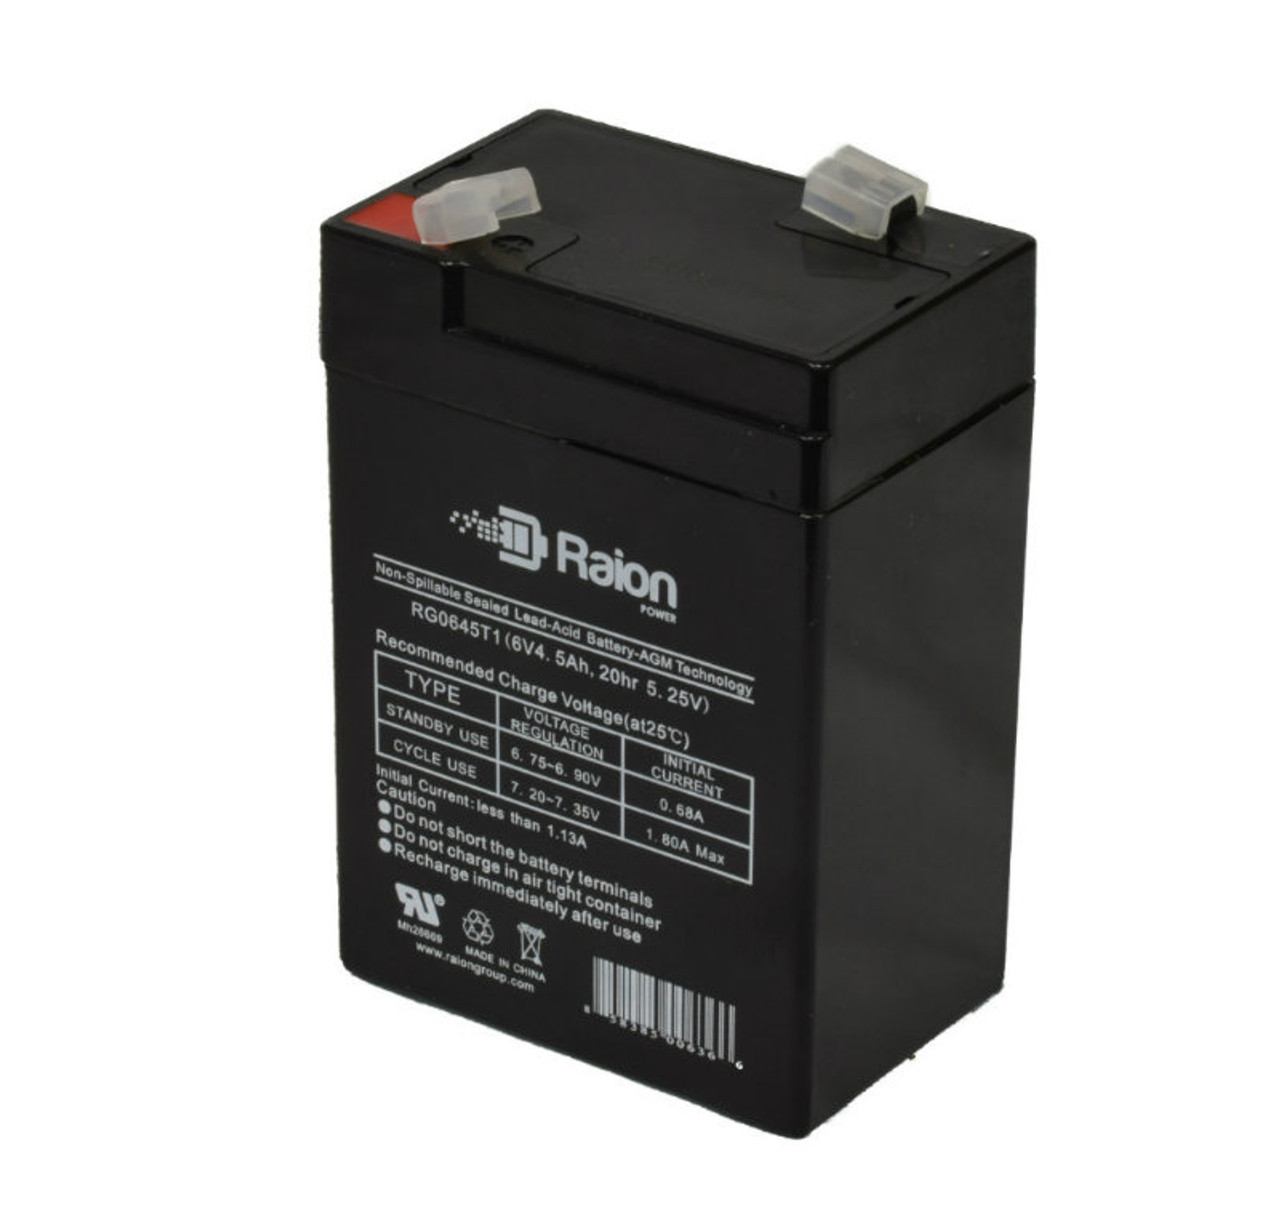 Raion Power RG0645T1 6V 4.5Ah Replacement Battery Cartridge for Teledyne 1880005